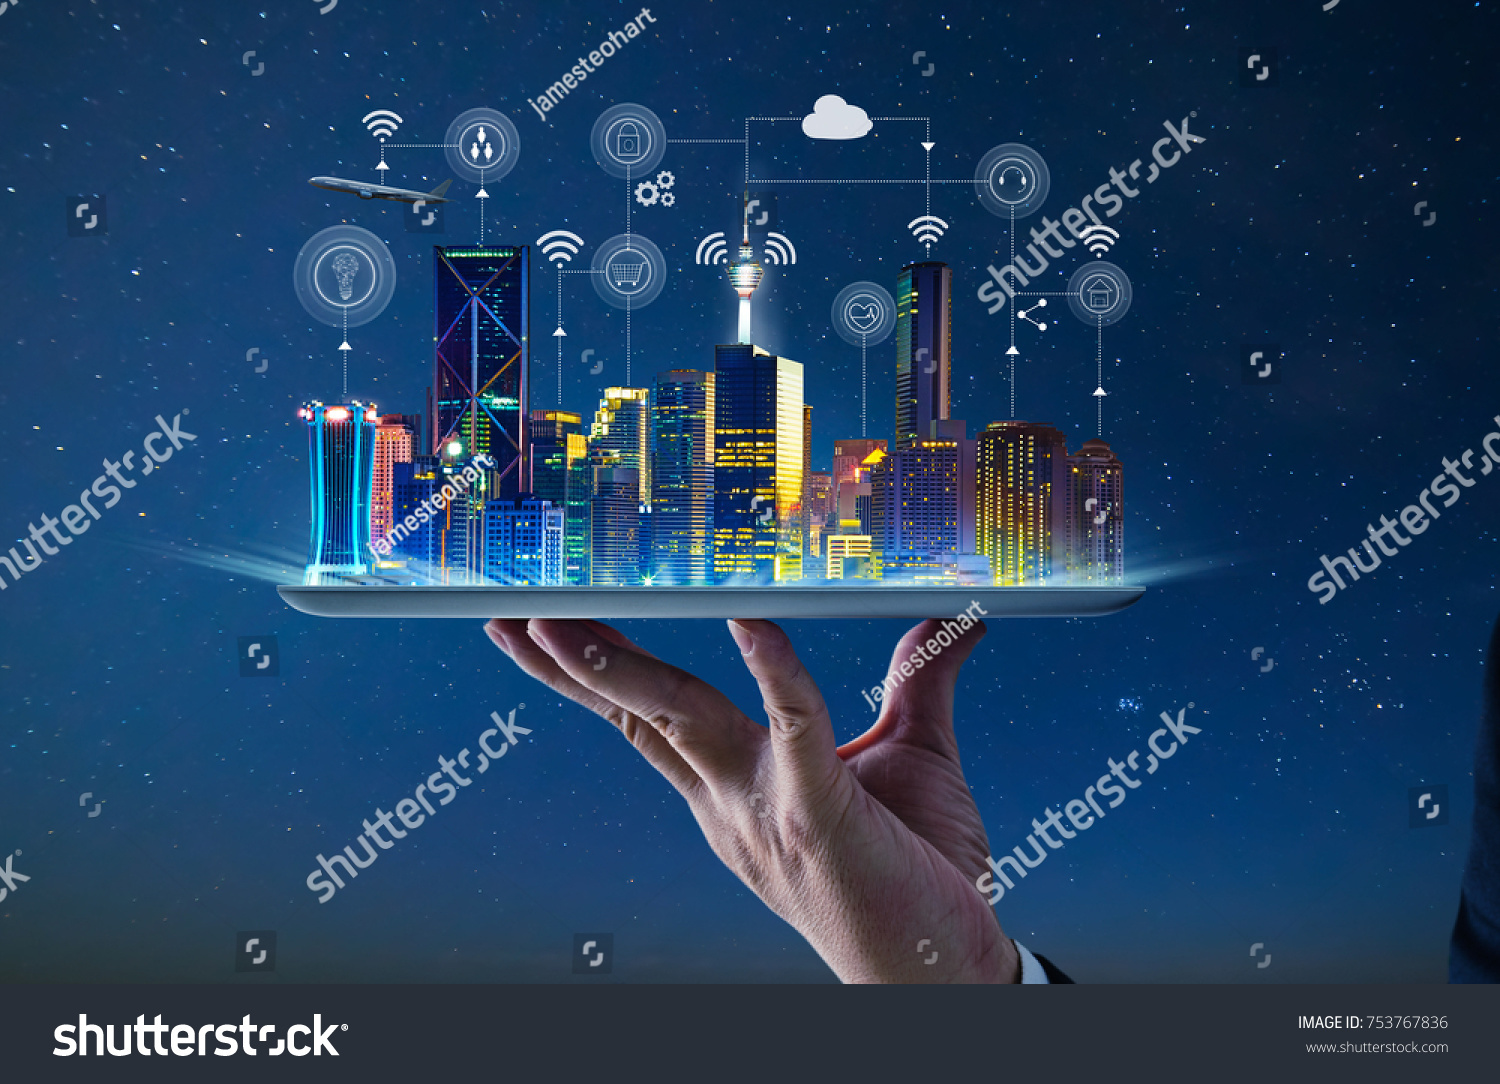 Waiter hand holding an empty digital tablet with Smart city with smart services and icons, internet of things, networks and augmented reality concept , night scene . #753767836